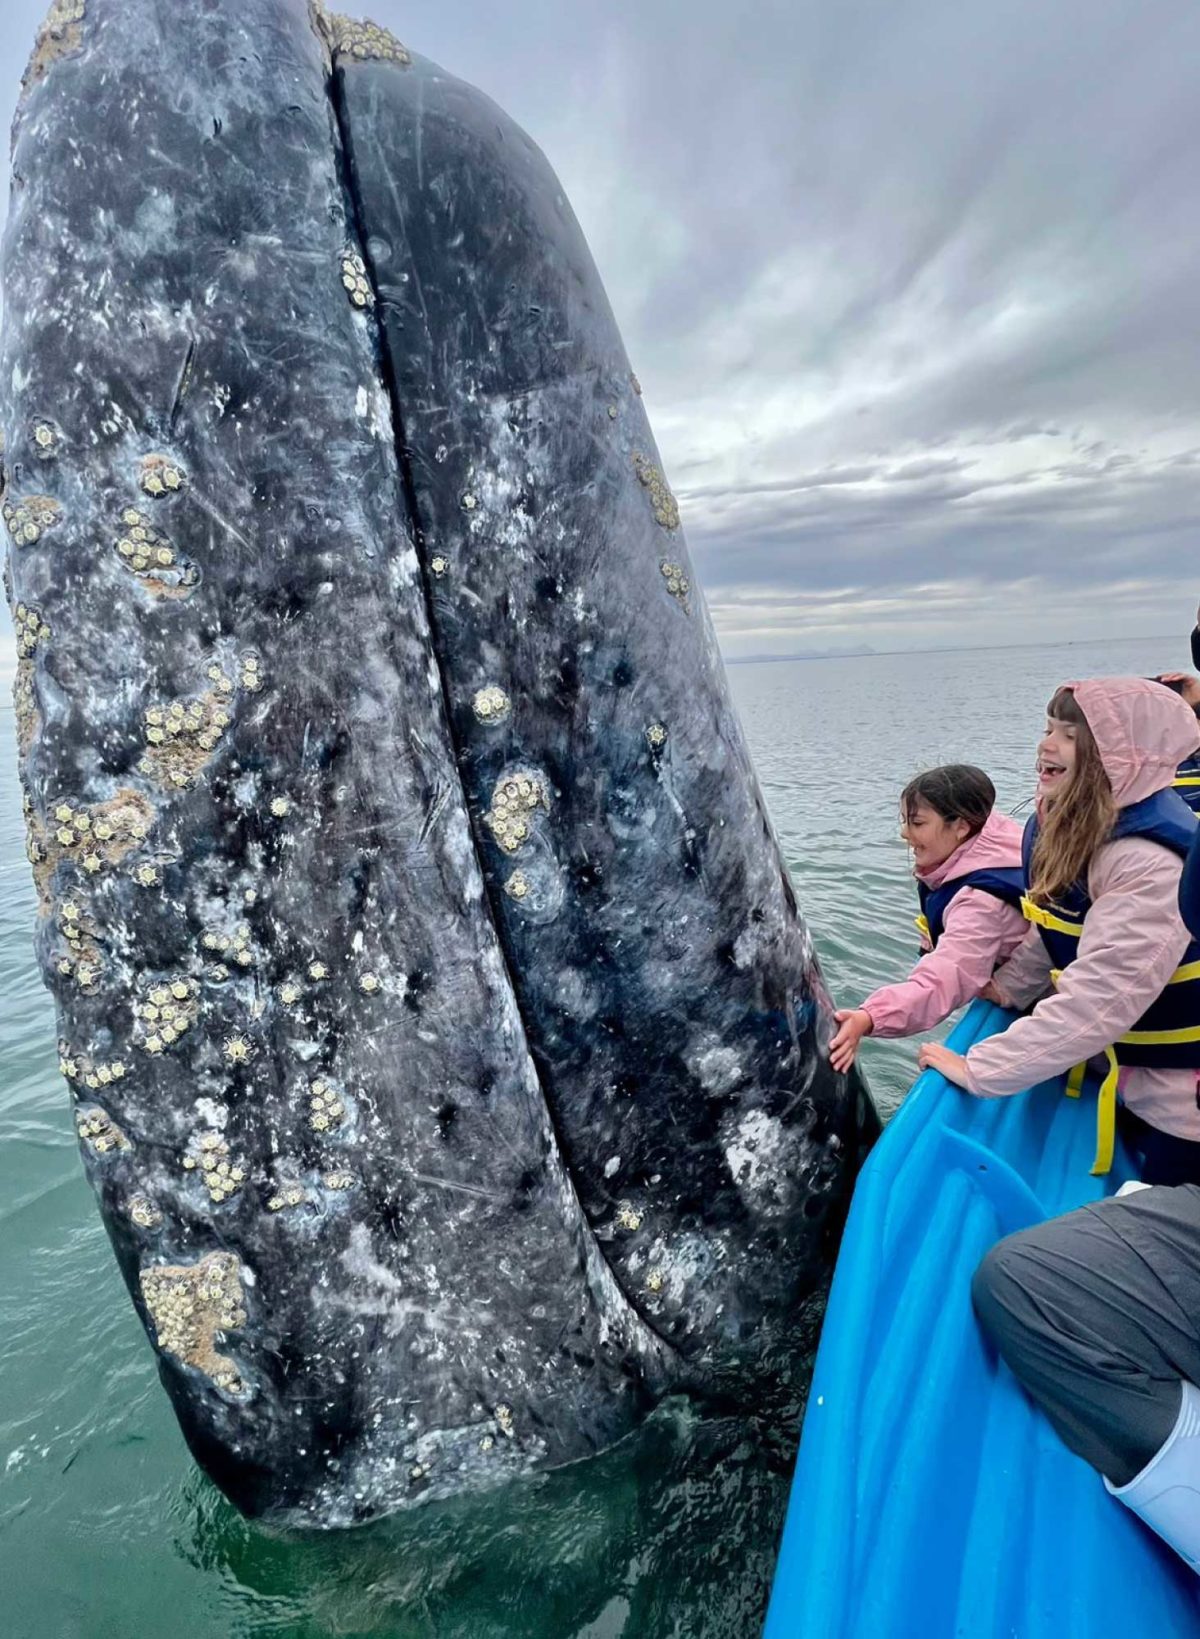 NOAA announces that the gray whale population has rebounded